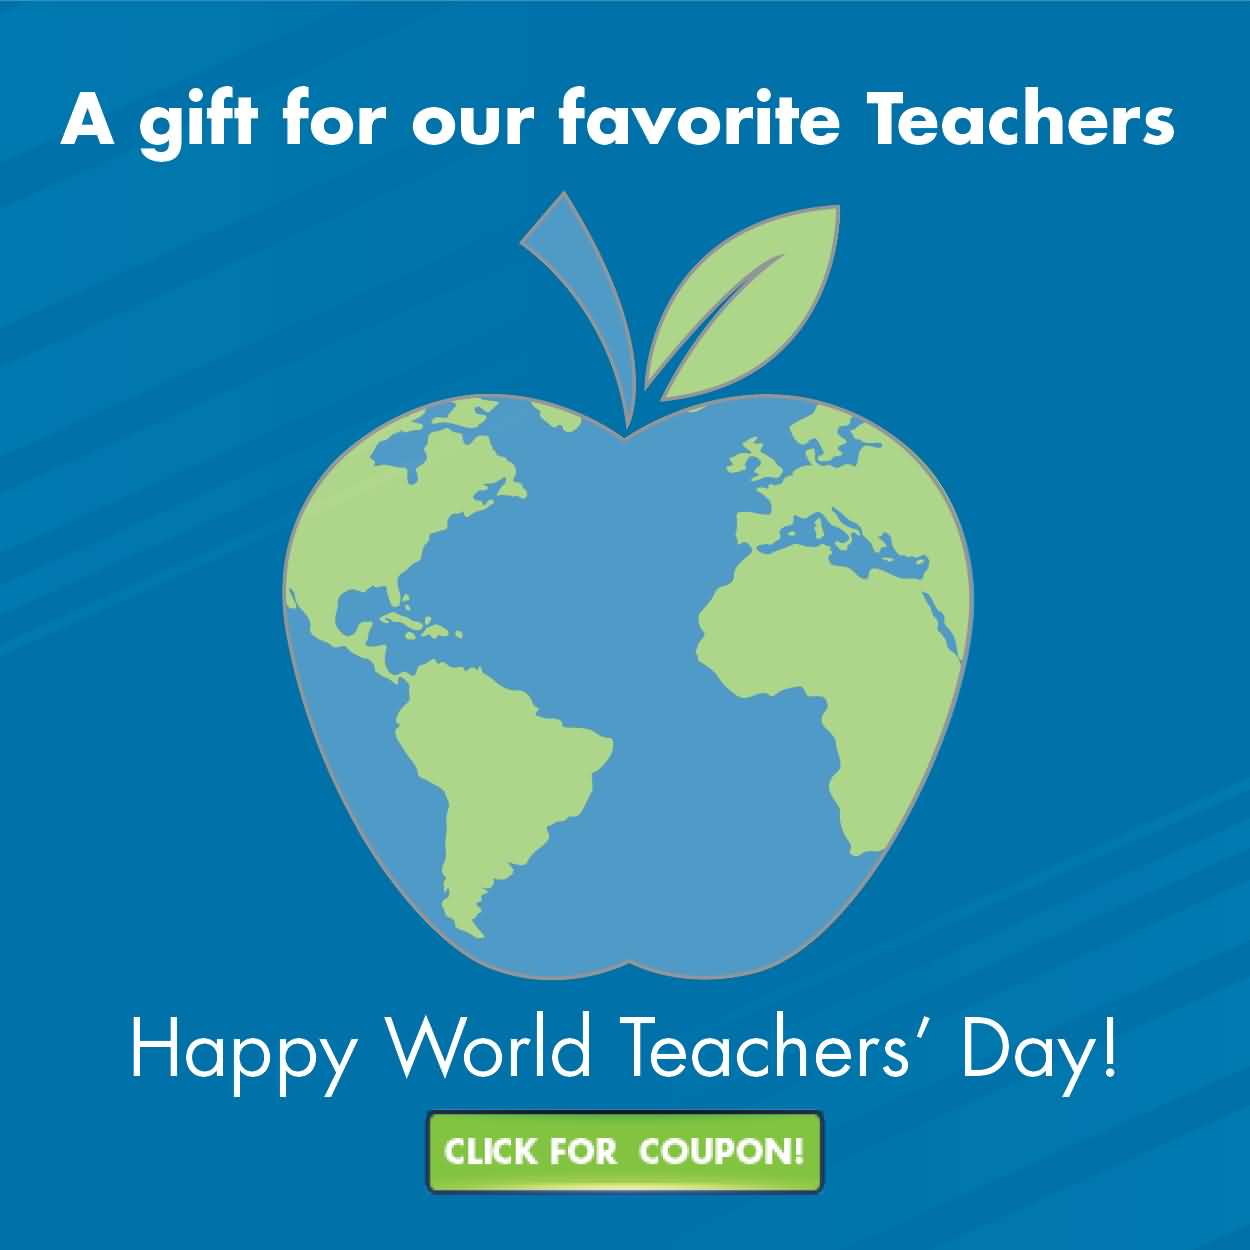 A Gift For Our Favorite Teachers Happy World Teachers' Day